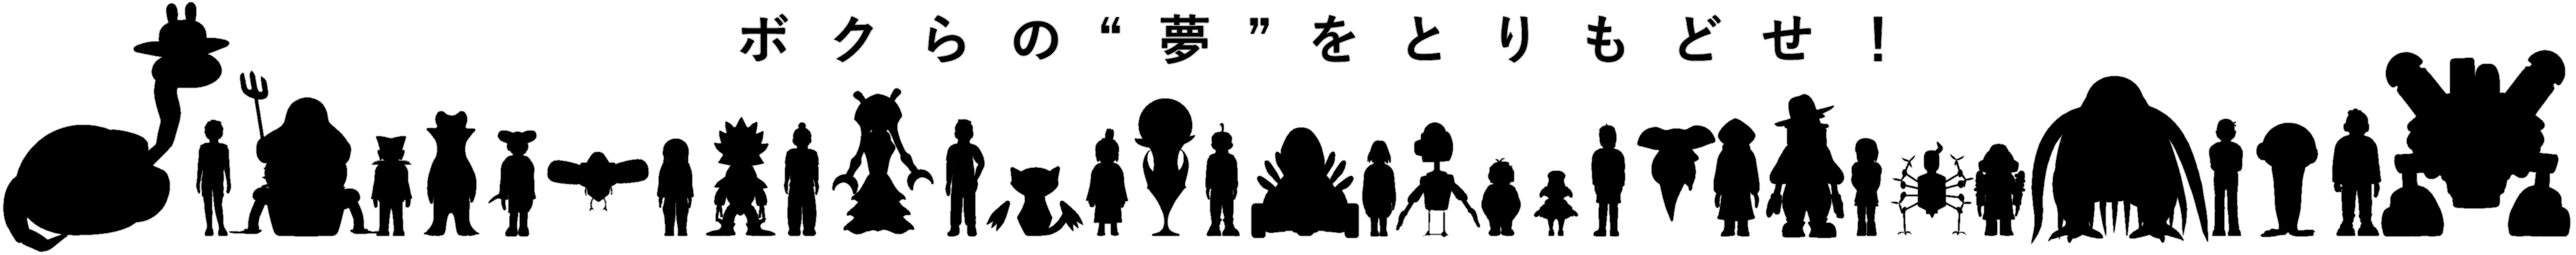 silhouette.png